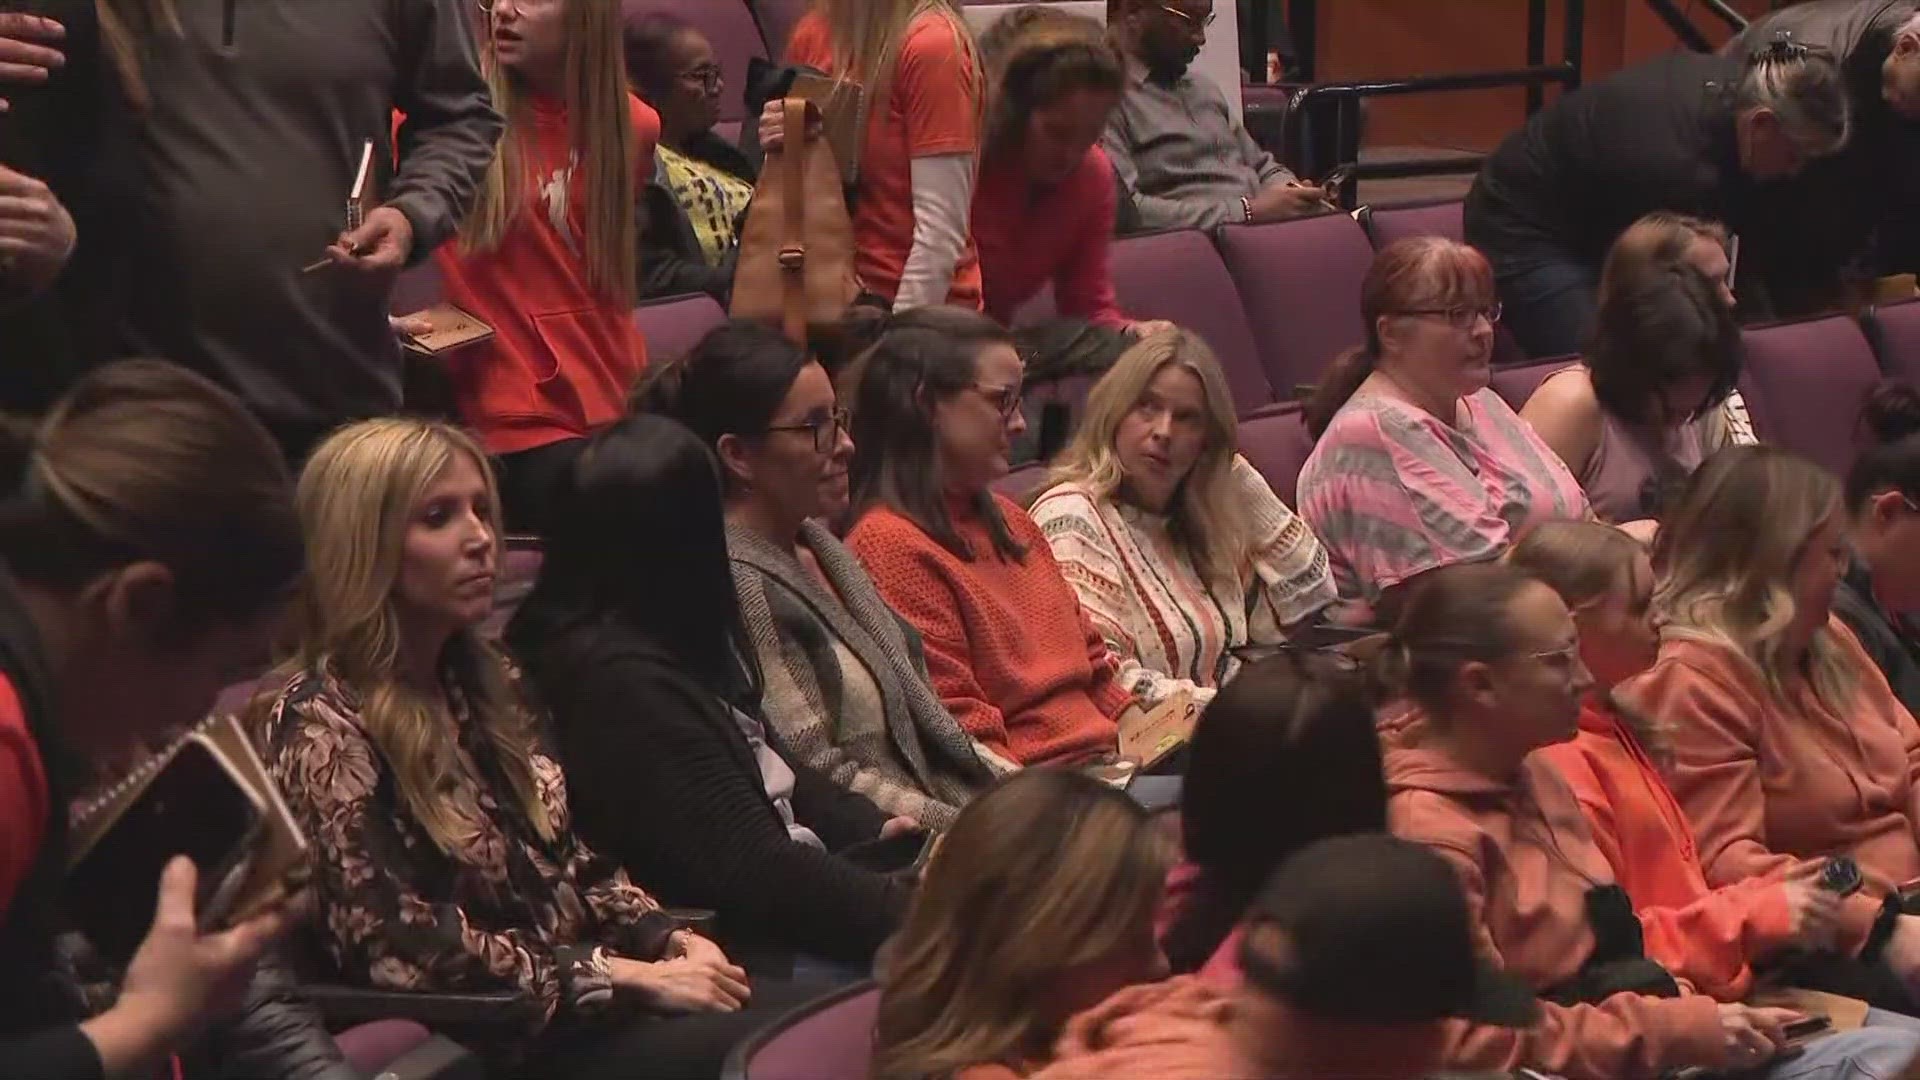 Stories of teen violence happening across the Valley was the reason 12News hosted a town hall meeting Monday night.